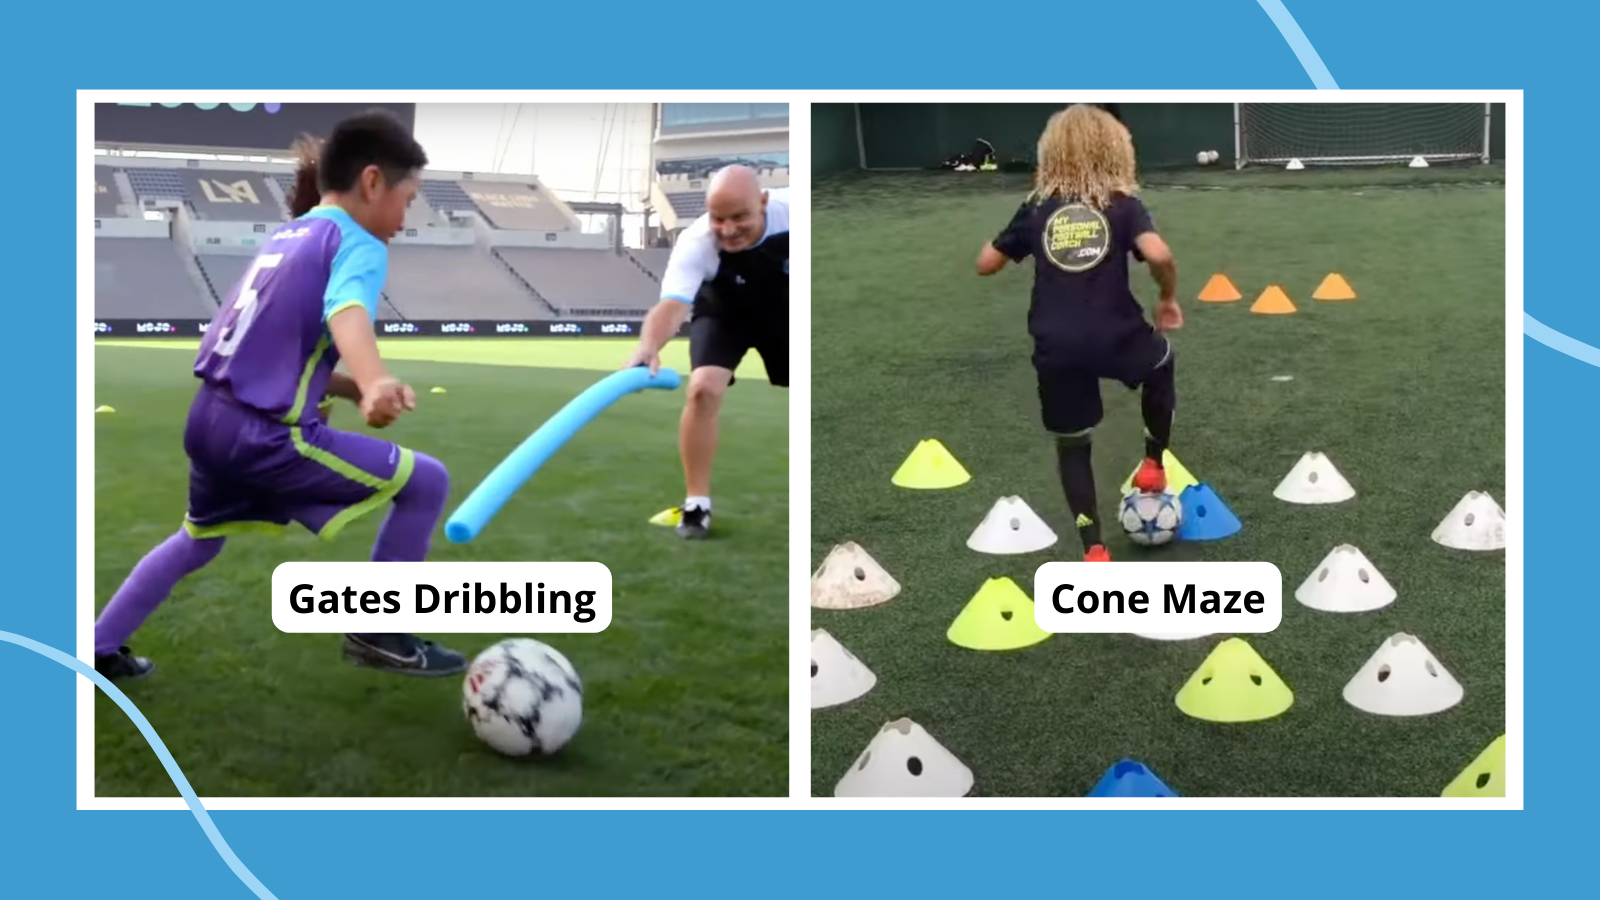 Kids doing soccer drills such as cone maze and gates dribbling.